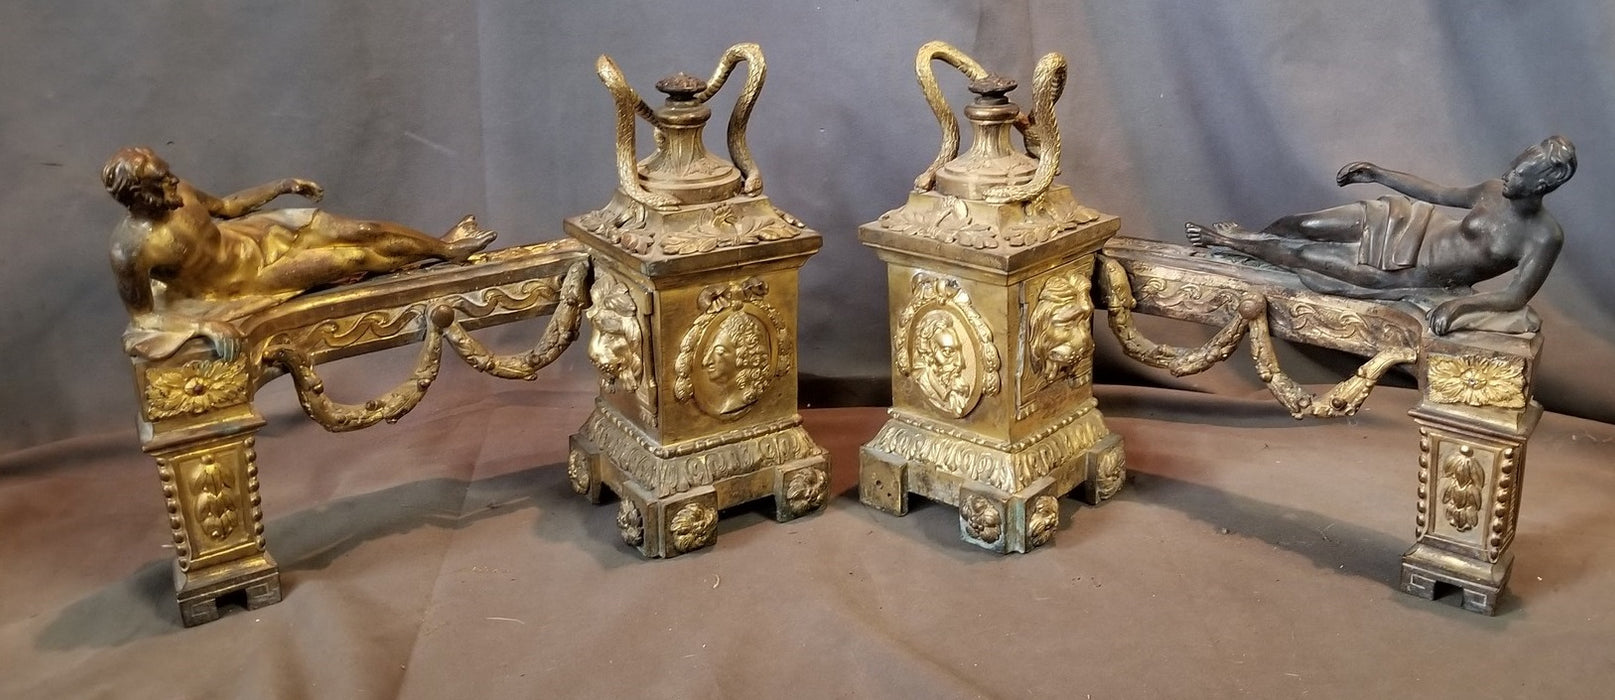 PAIR OF SMALL BRASS ANDIRONS WITH CLASSICAL FIGURES AND SNAKES